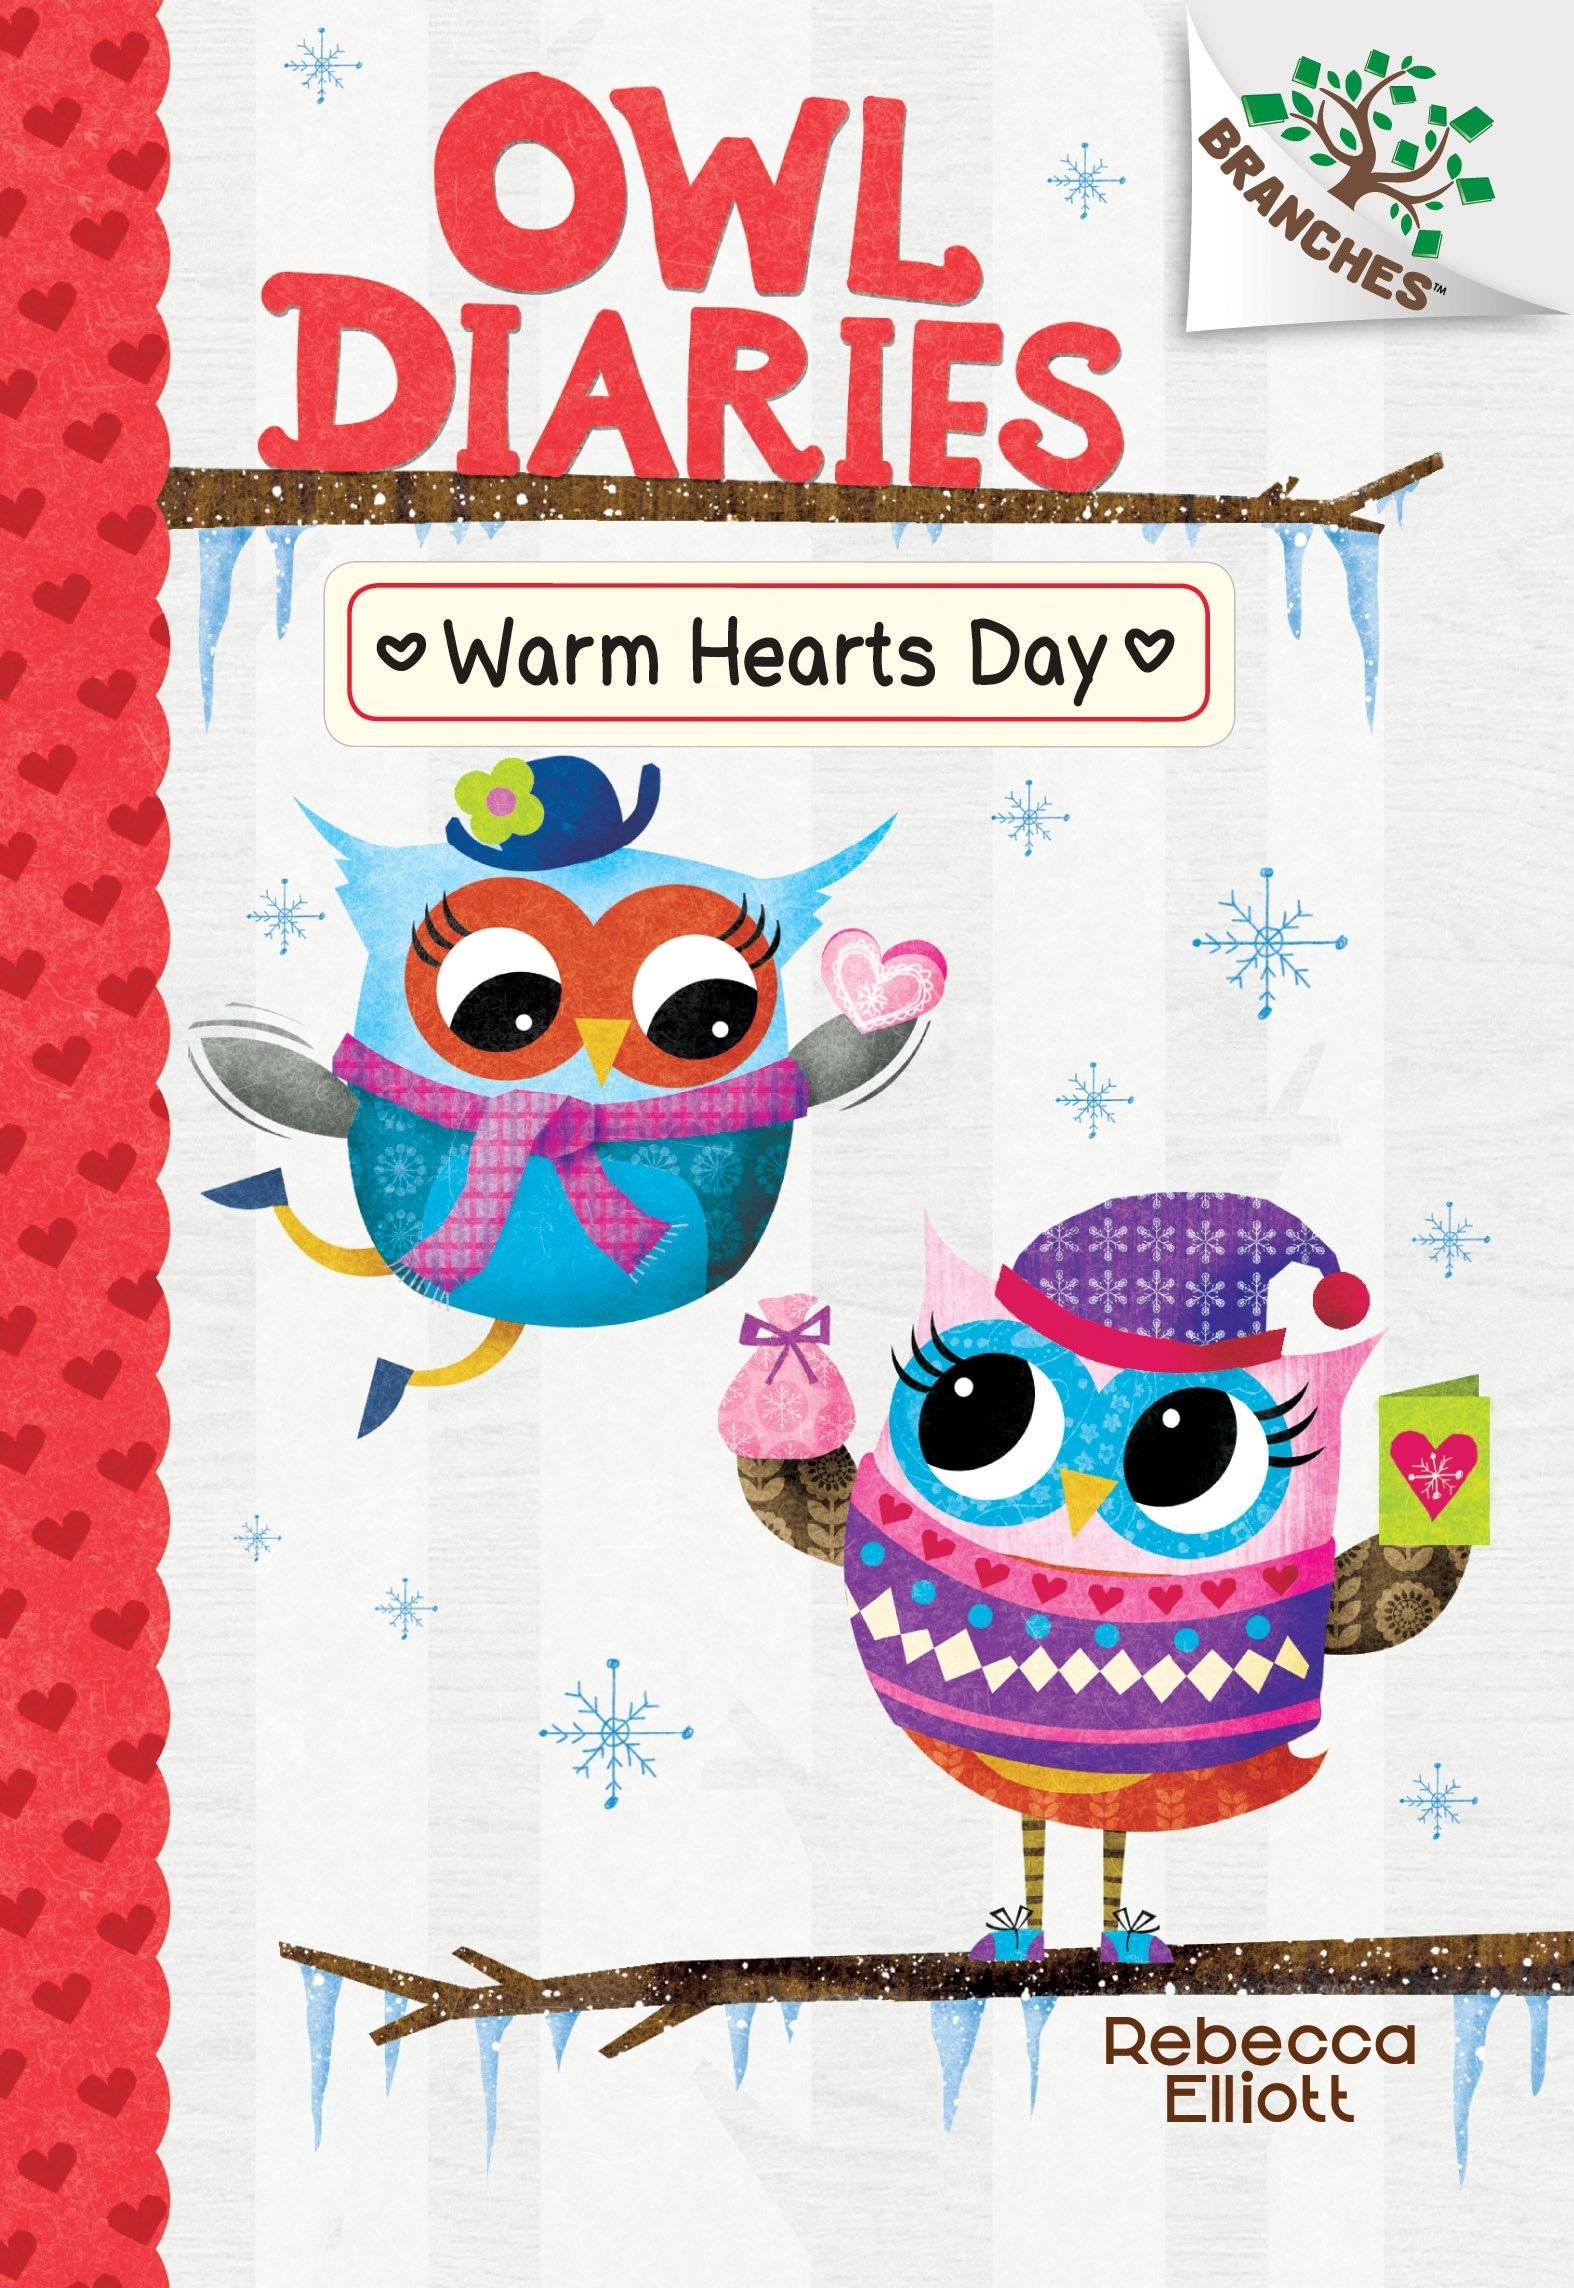 IMG : Owl Diaries - Warm Hearts Day#5